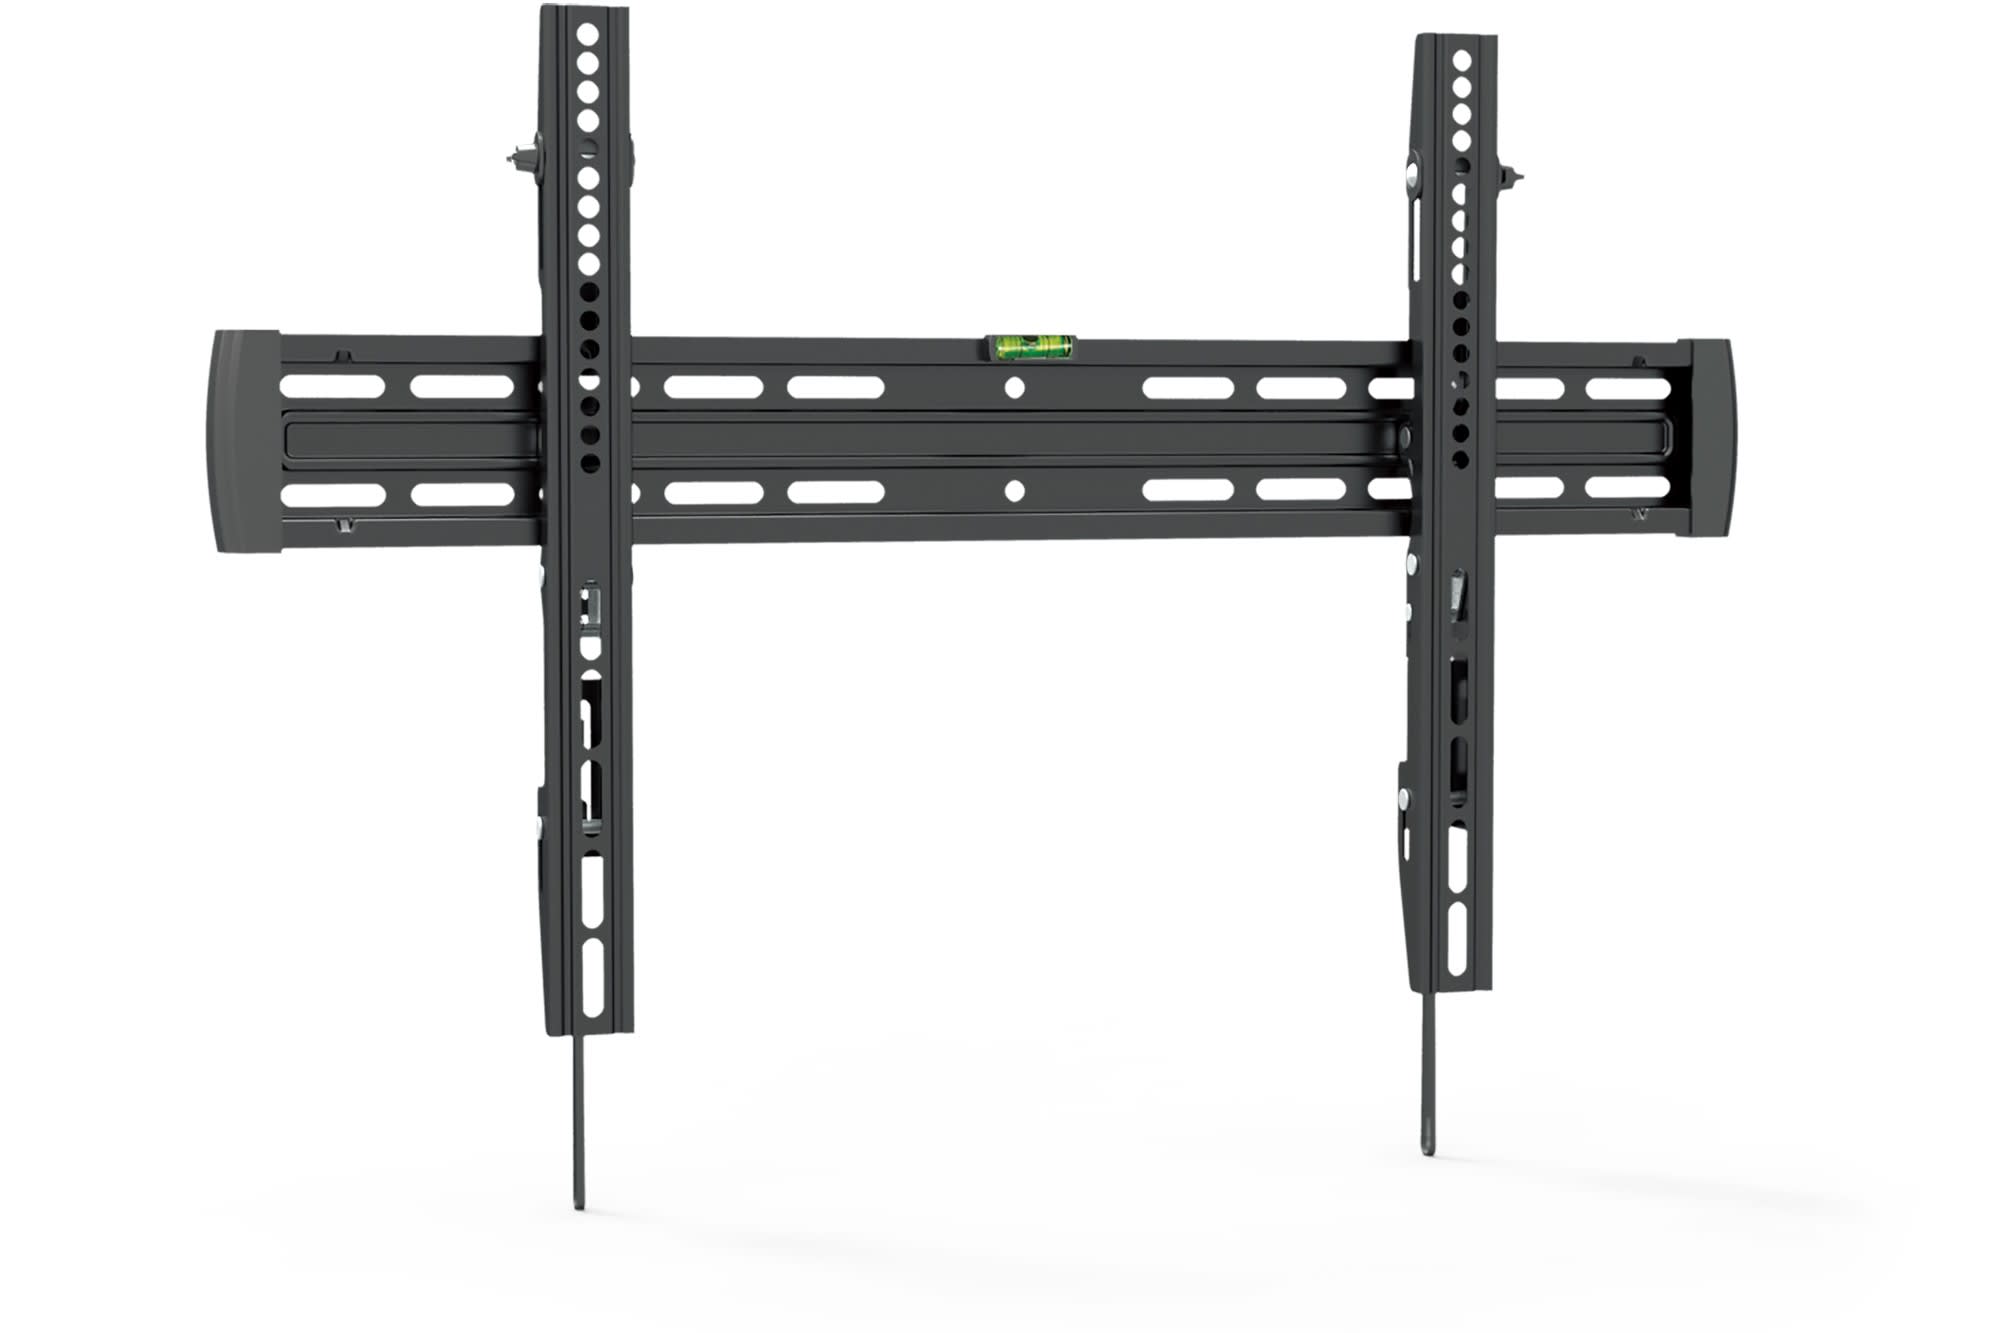 Assmann Electronic - Wall Mount for LCD-LED monitor up to 178cm (70) -12D tilting, 40kg max load, VE